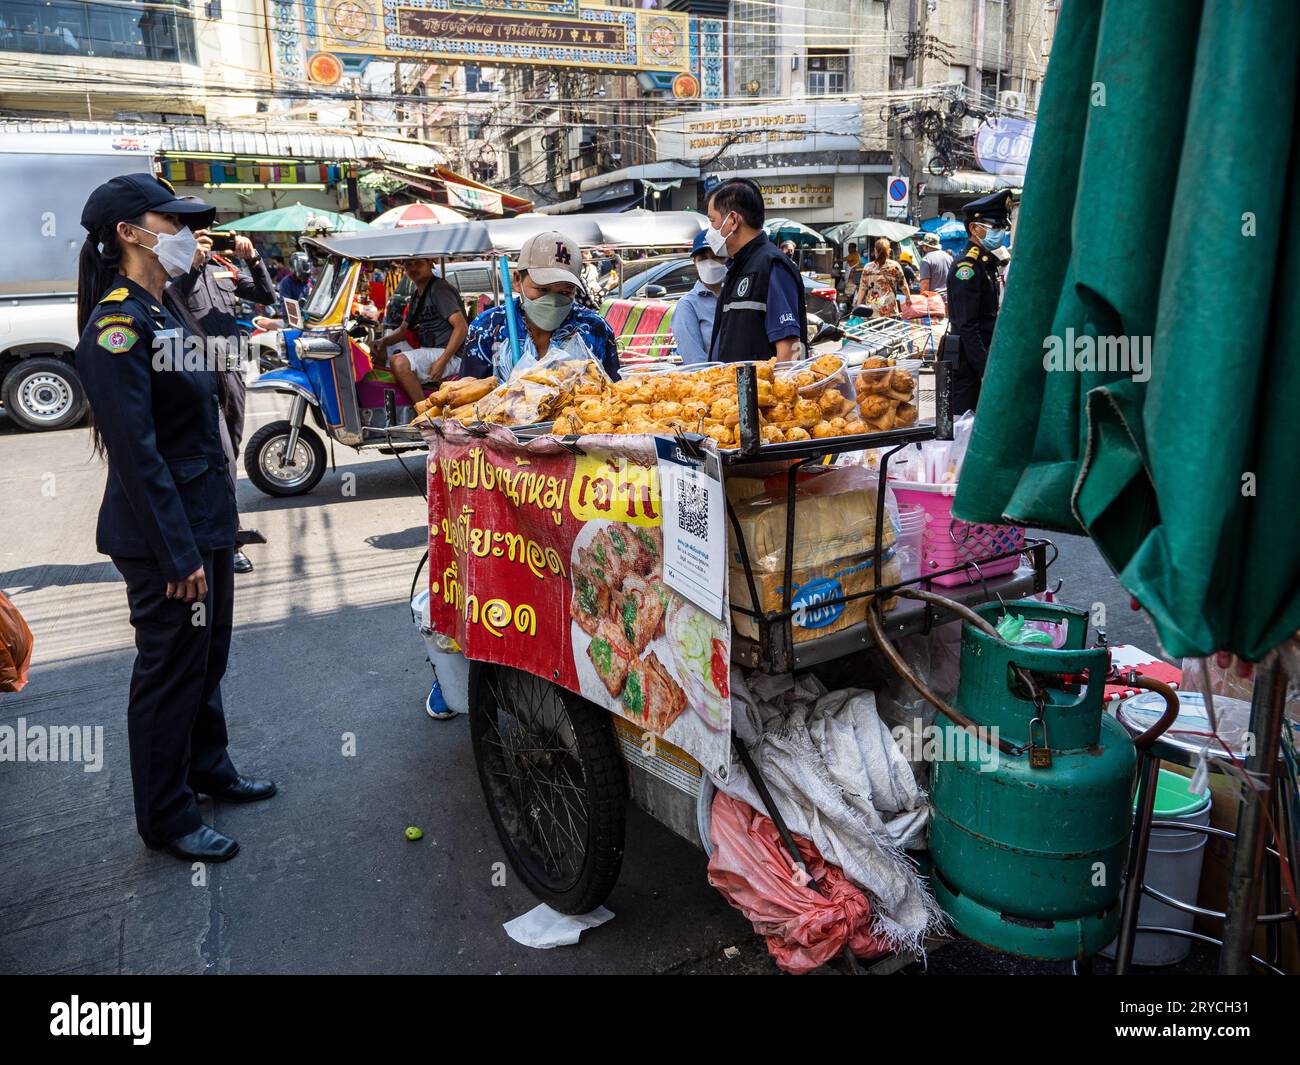 Hectic Bangkok street: A vibrant food vendor and a lady in blue against the iconic tuk-tuk backdrop, embodying the city's energy and charm. Stock Photo